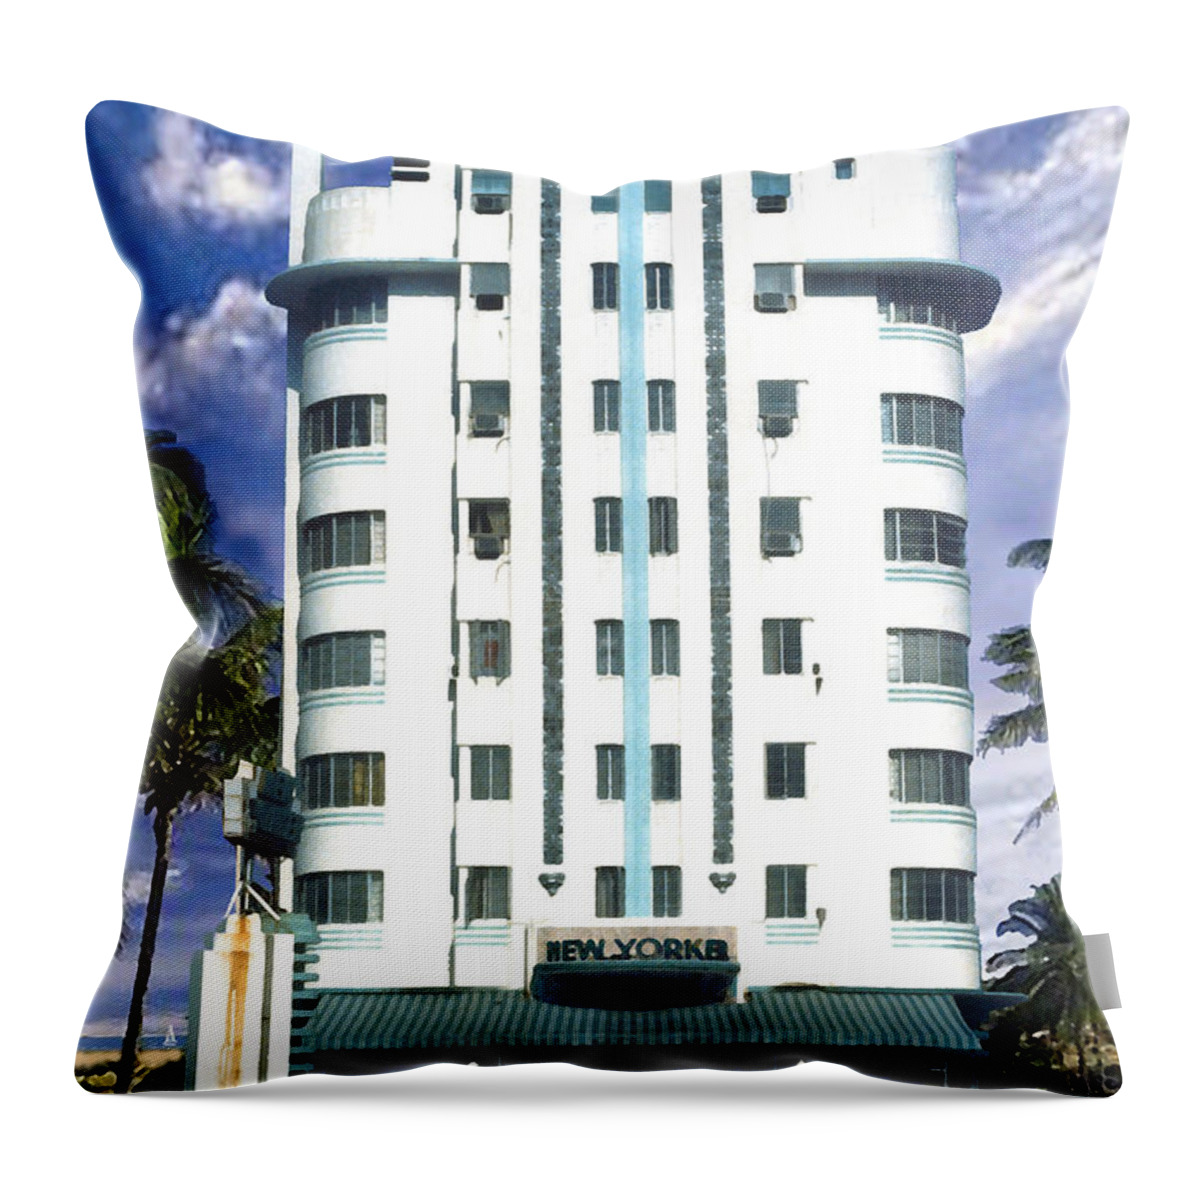 Miami Throw Pillow featuring the photograph The New Yorker by Steve Karol